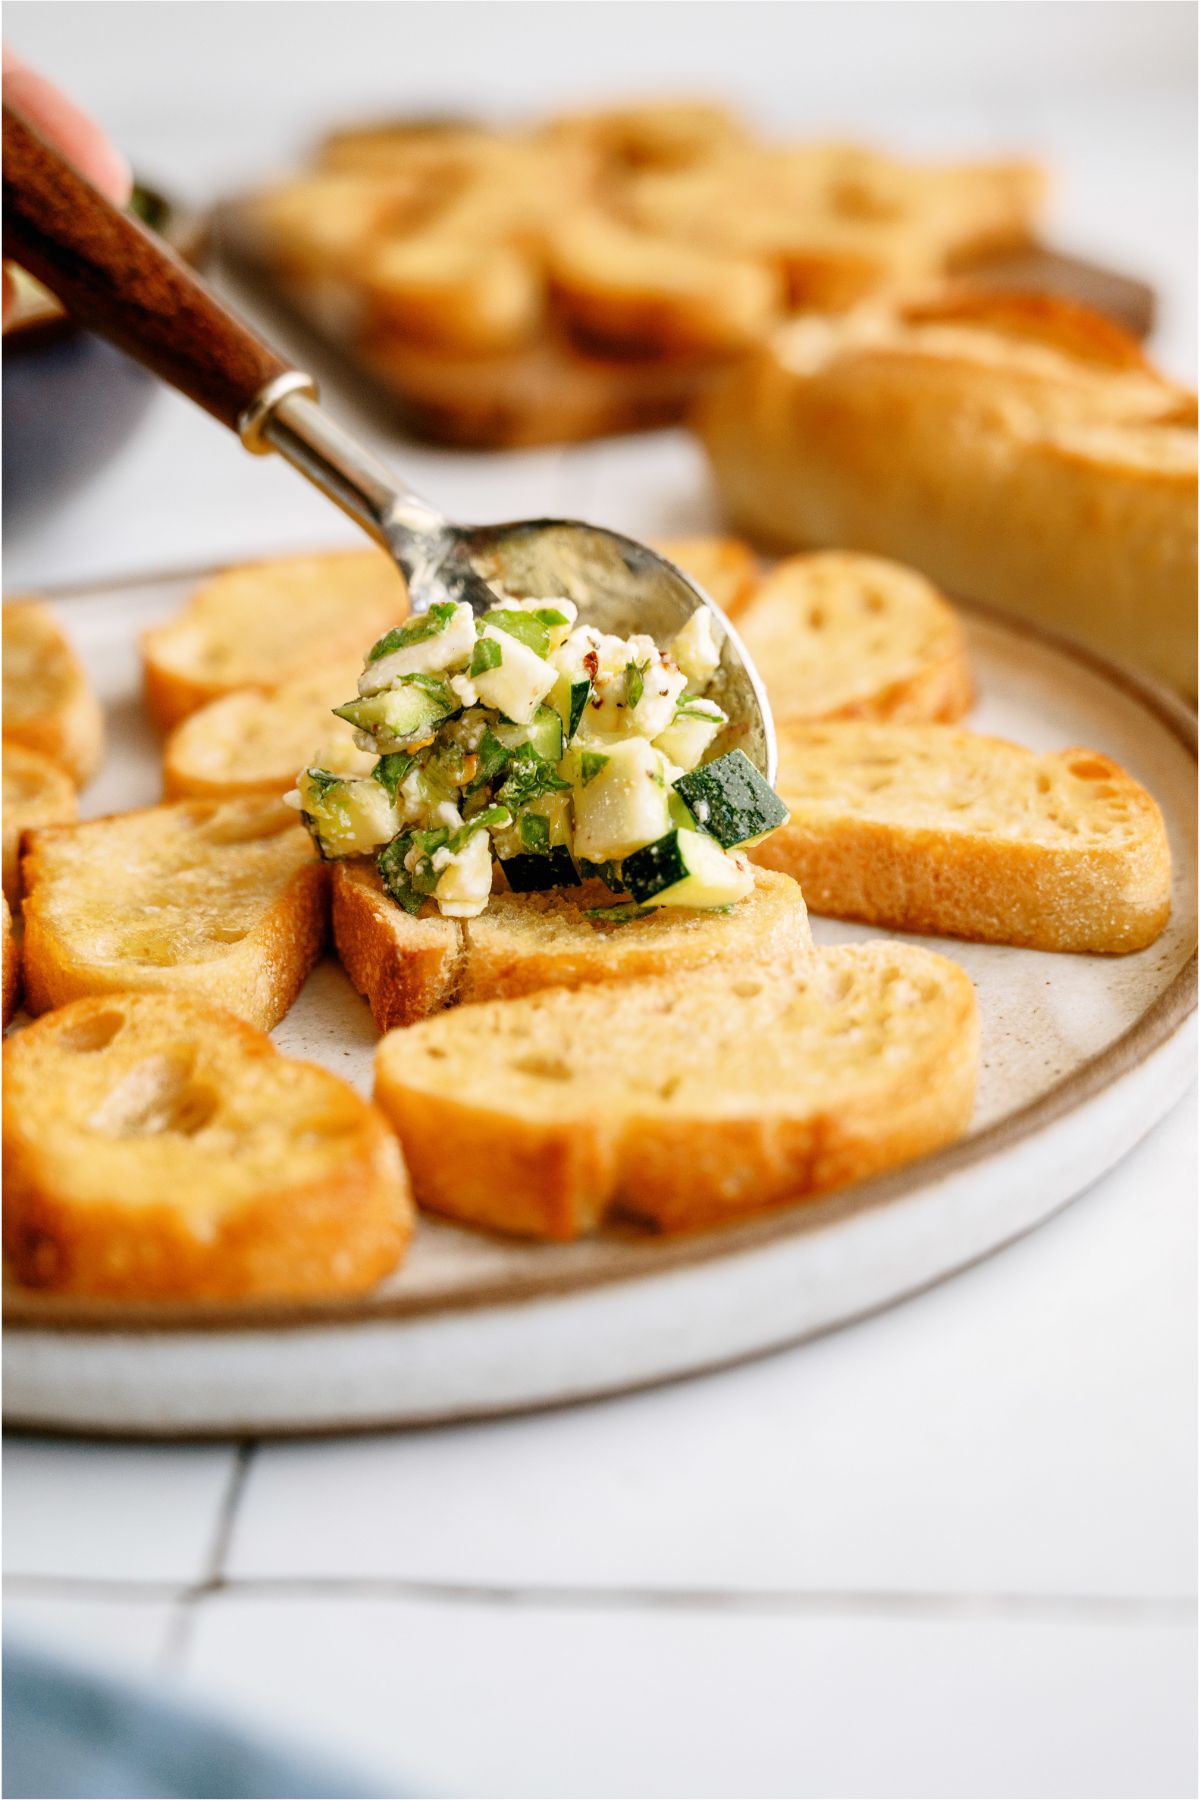 Spooning Zucchini Feta Bruschetta on top of sliced and toasted baguette bread 